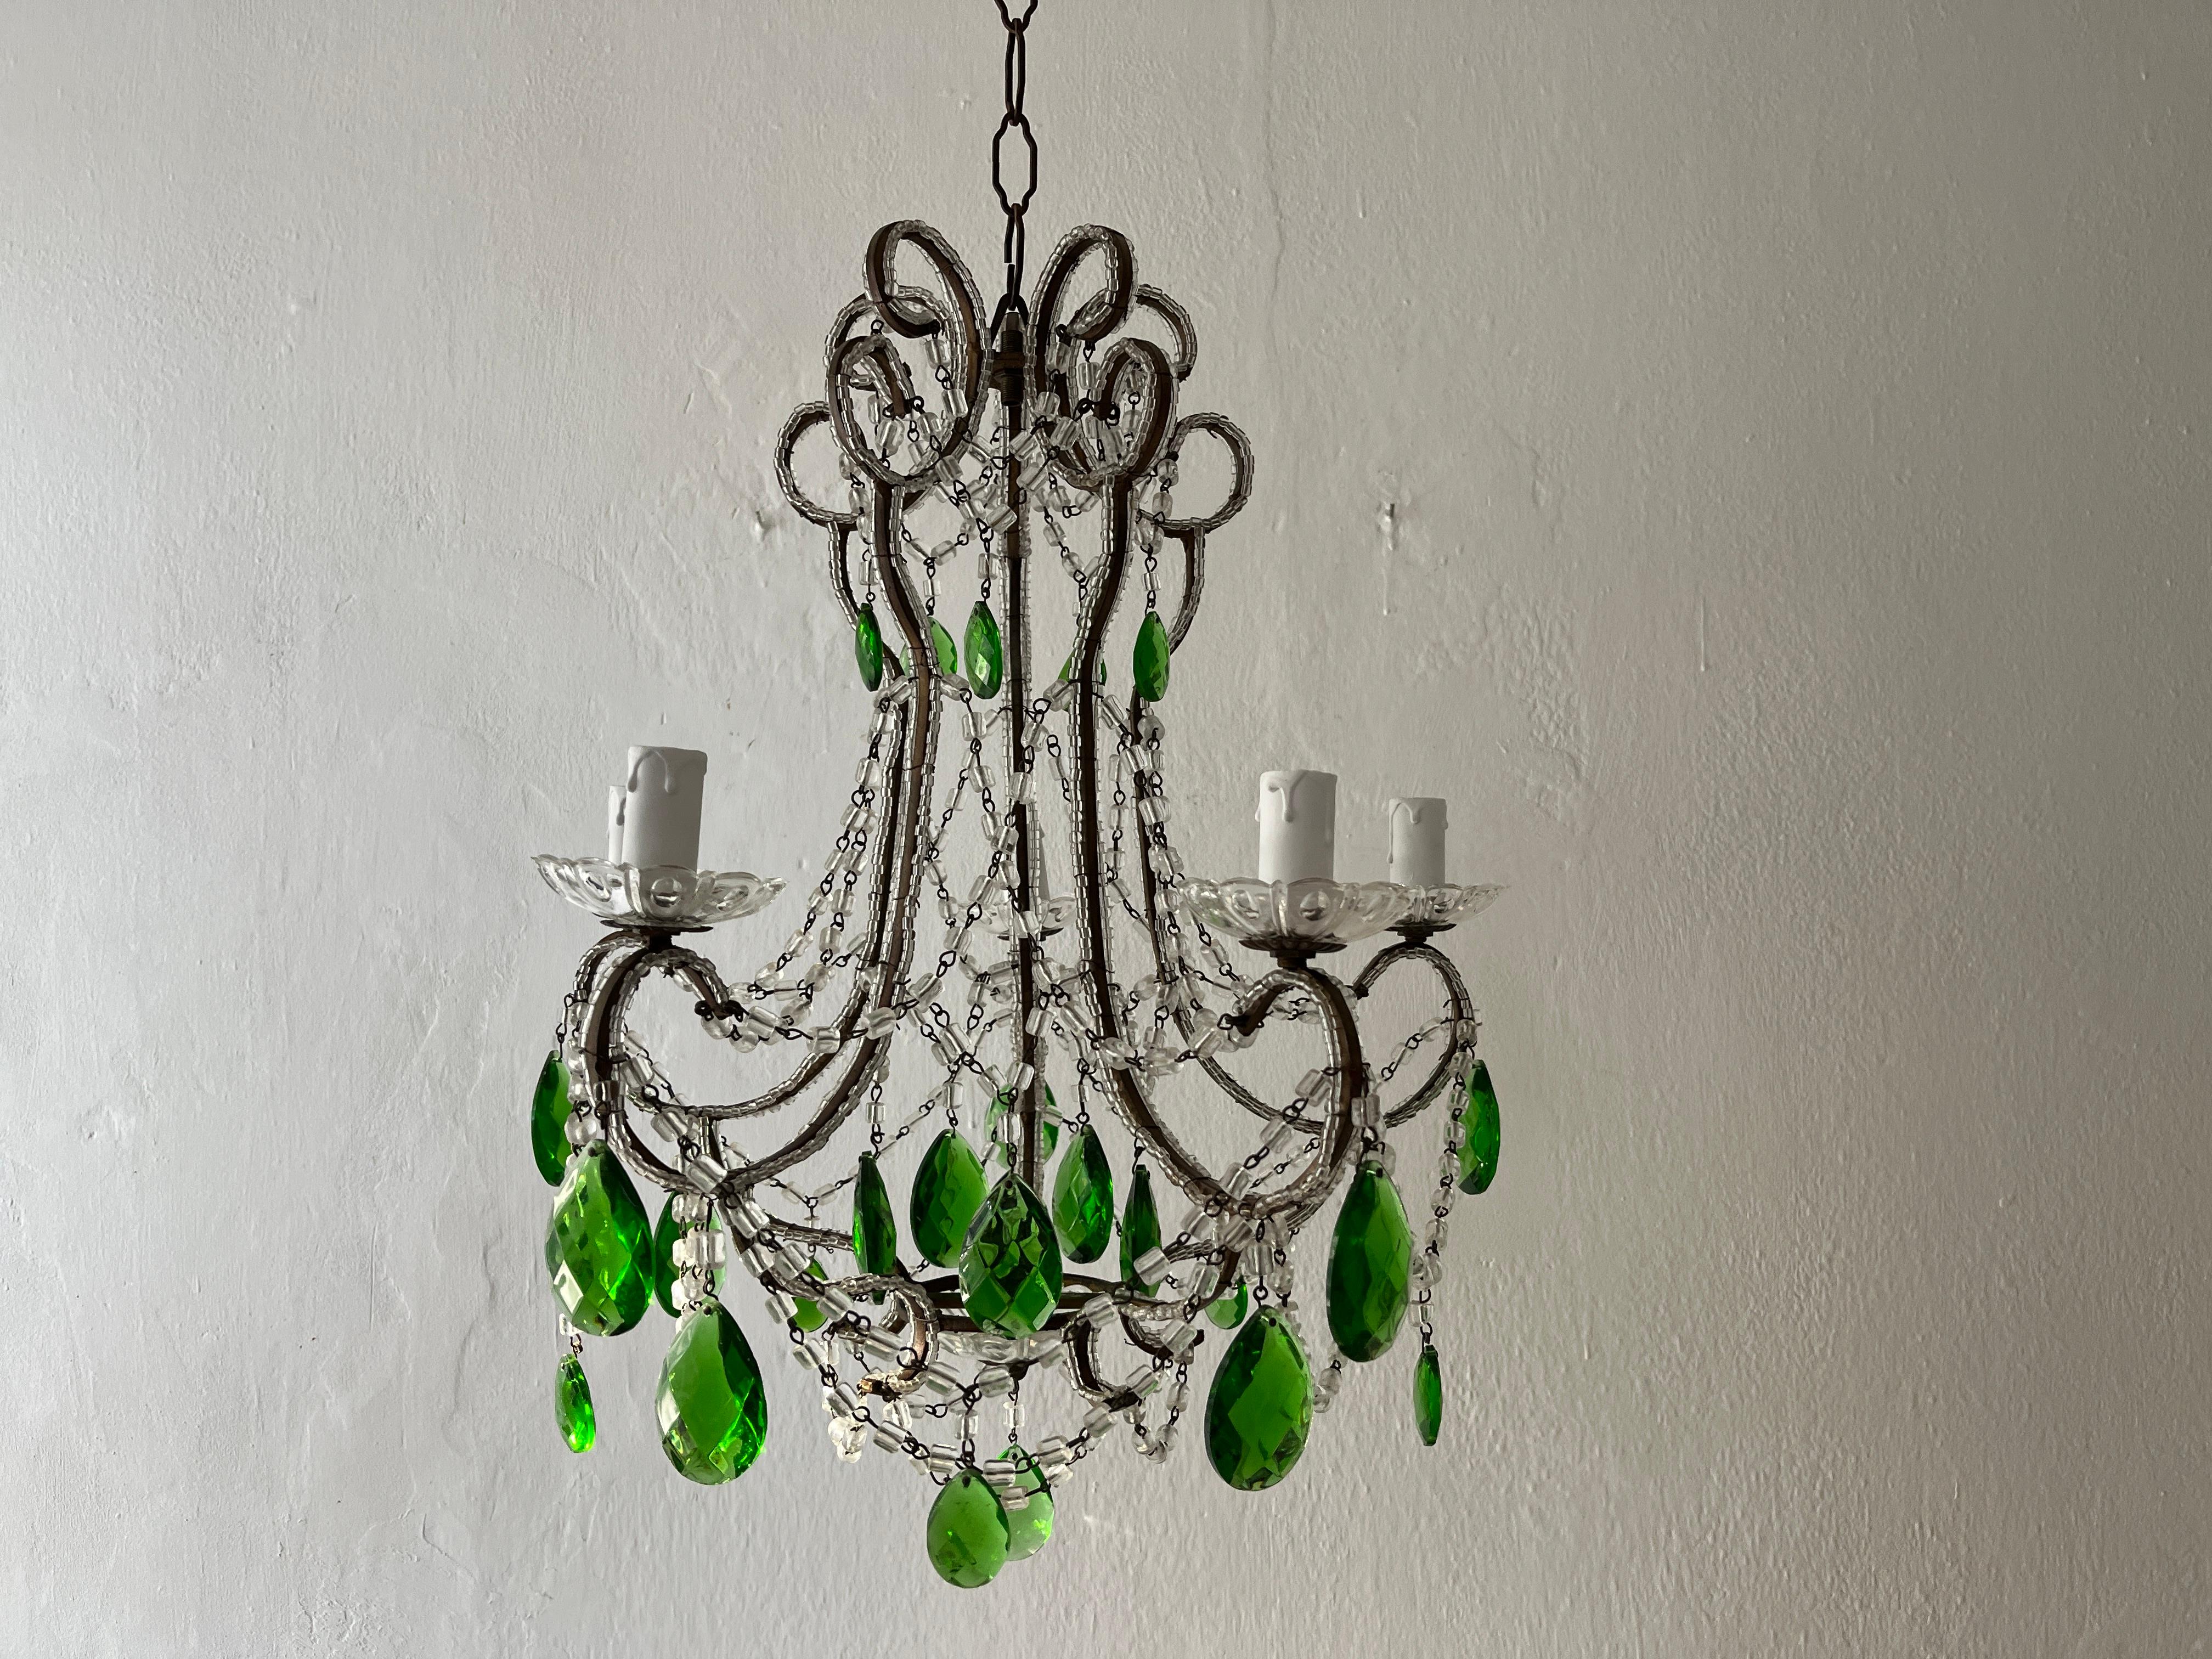 Housing 5 lights, sitting in crystal bobeches. Will be rewired with certified UL US sockets for the United States and appropriate sockets for country and ready to hang. Macaroni bead swags throughout with vintage green prisms, not missing one.